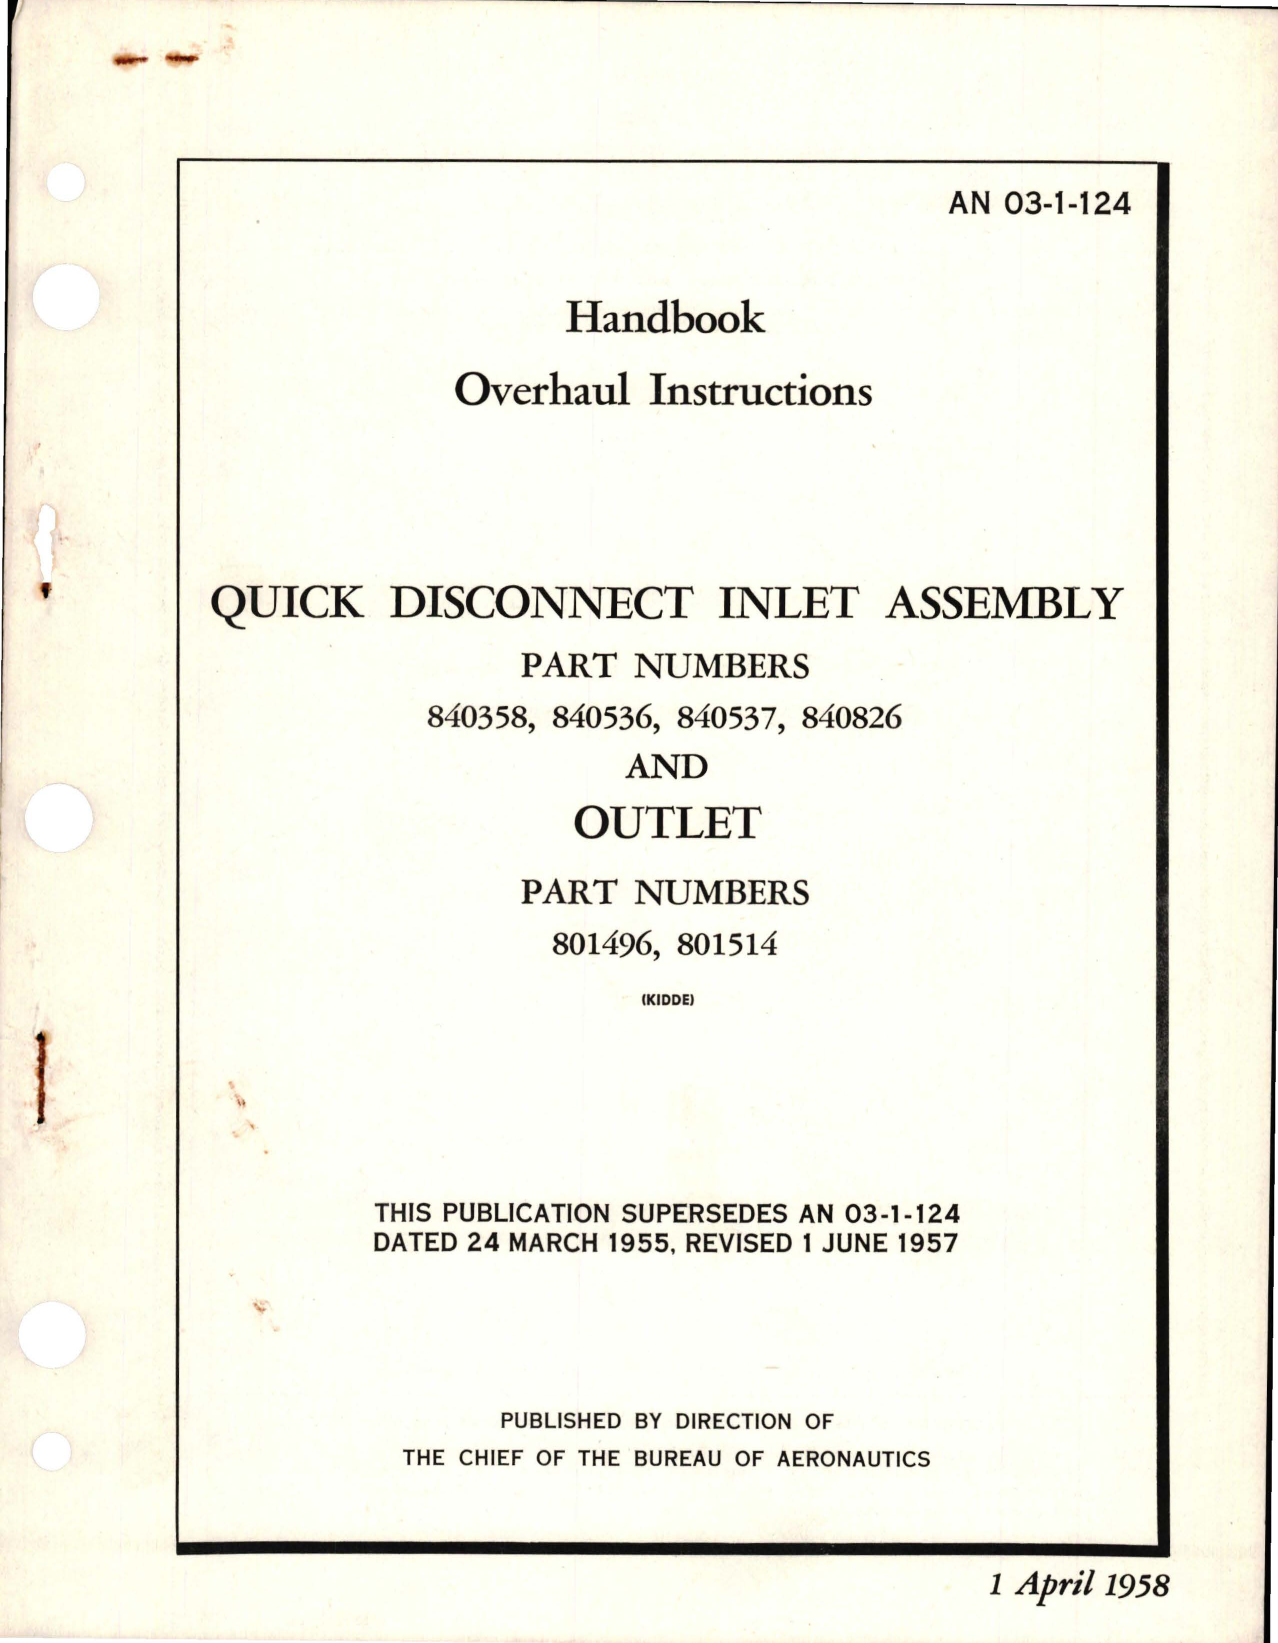 Sample page 1 from AirCorps Library document: Overhaul Instructions for Quick Disconnect Inlet Assembly and Outlet